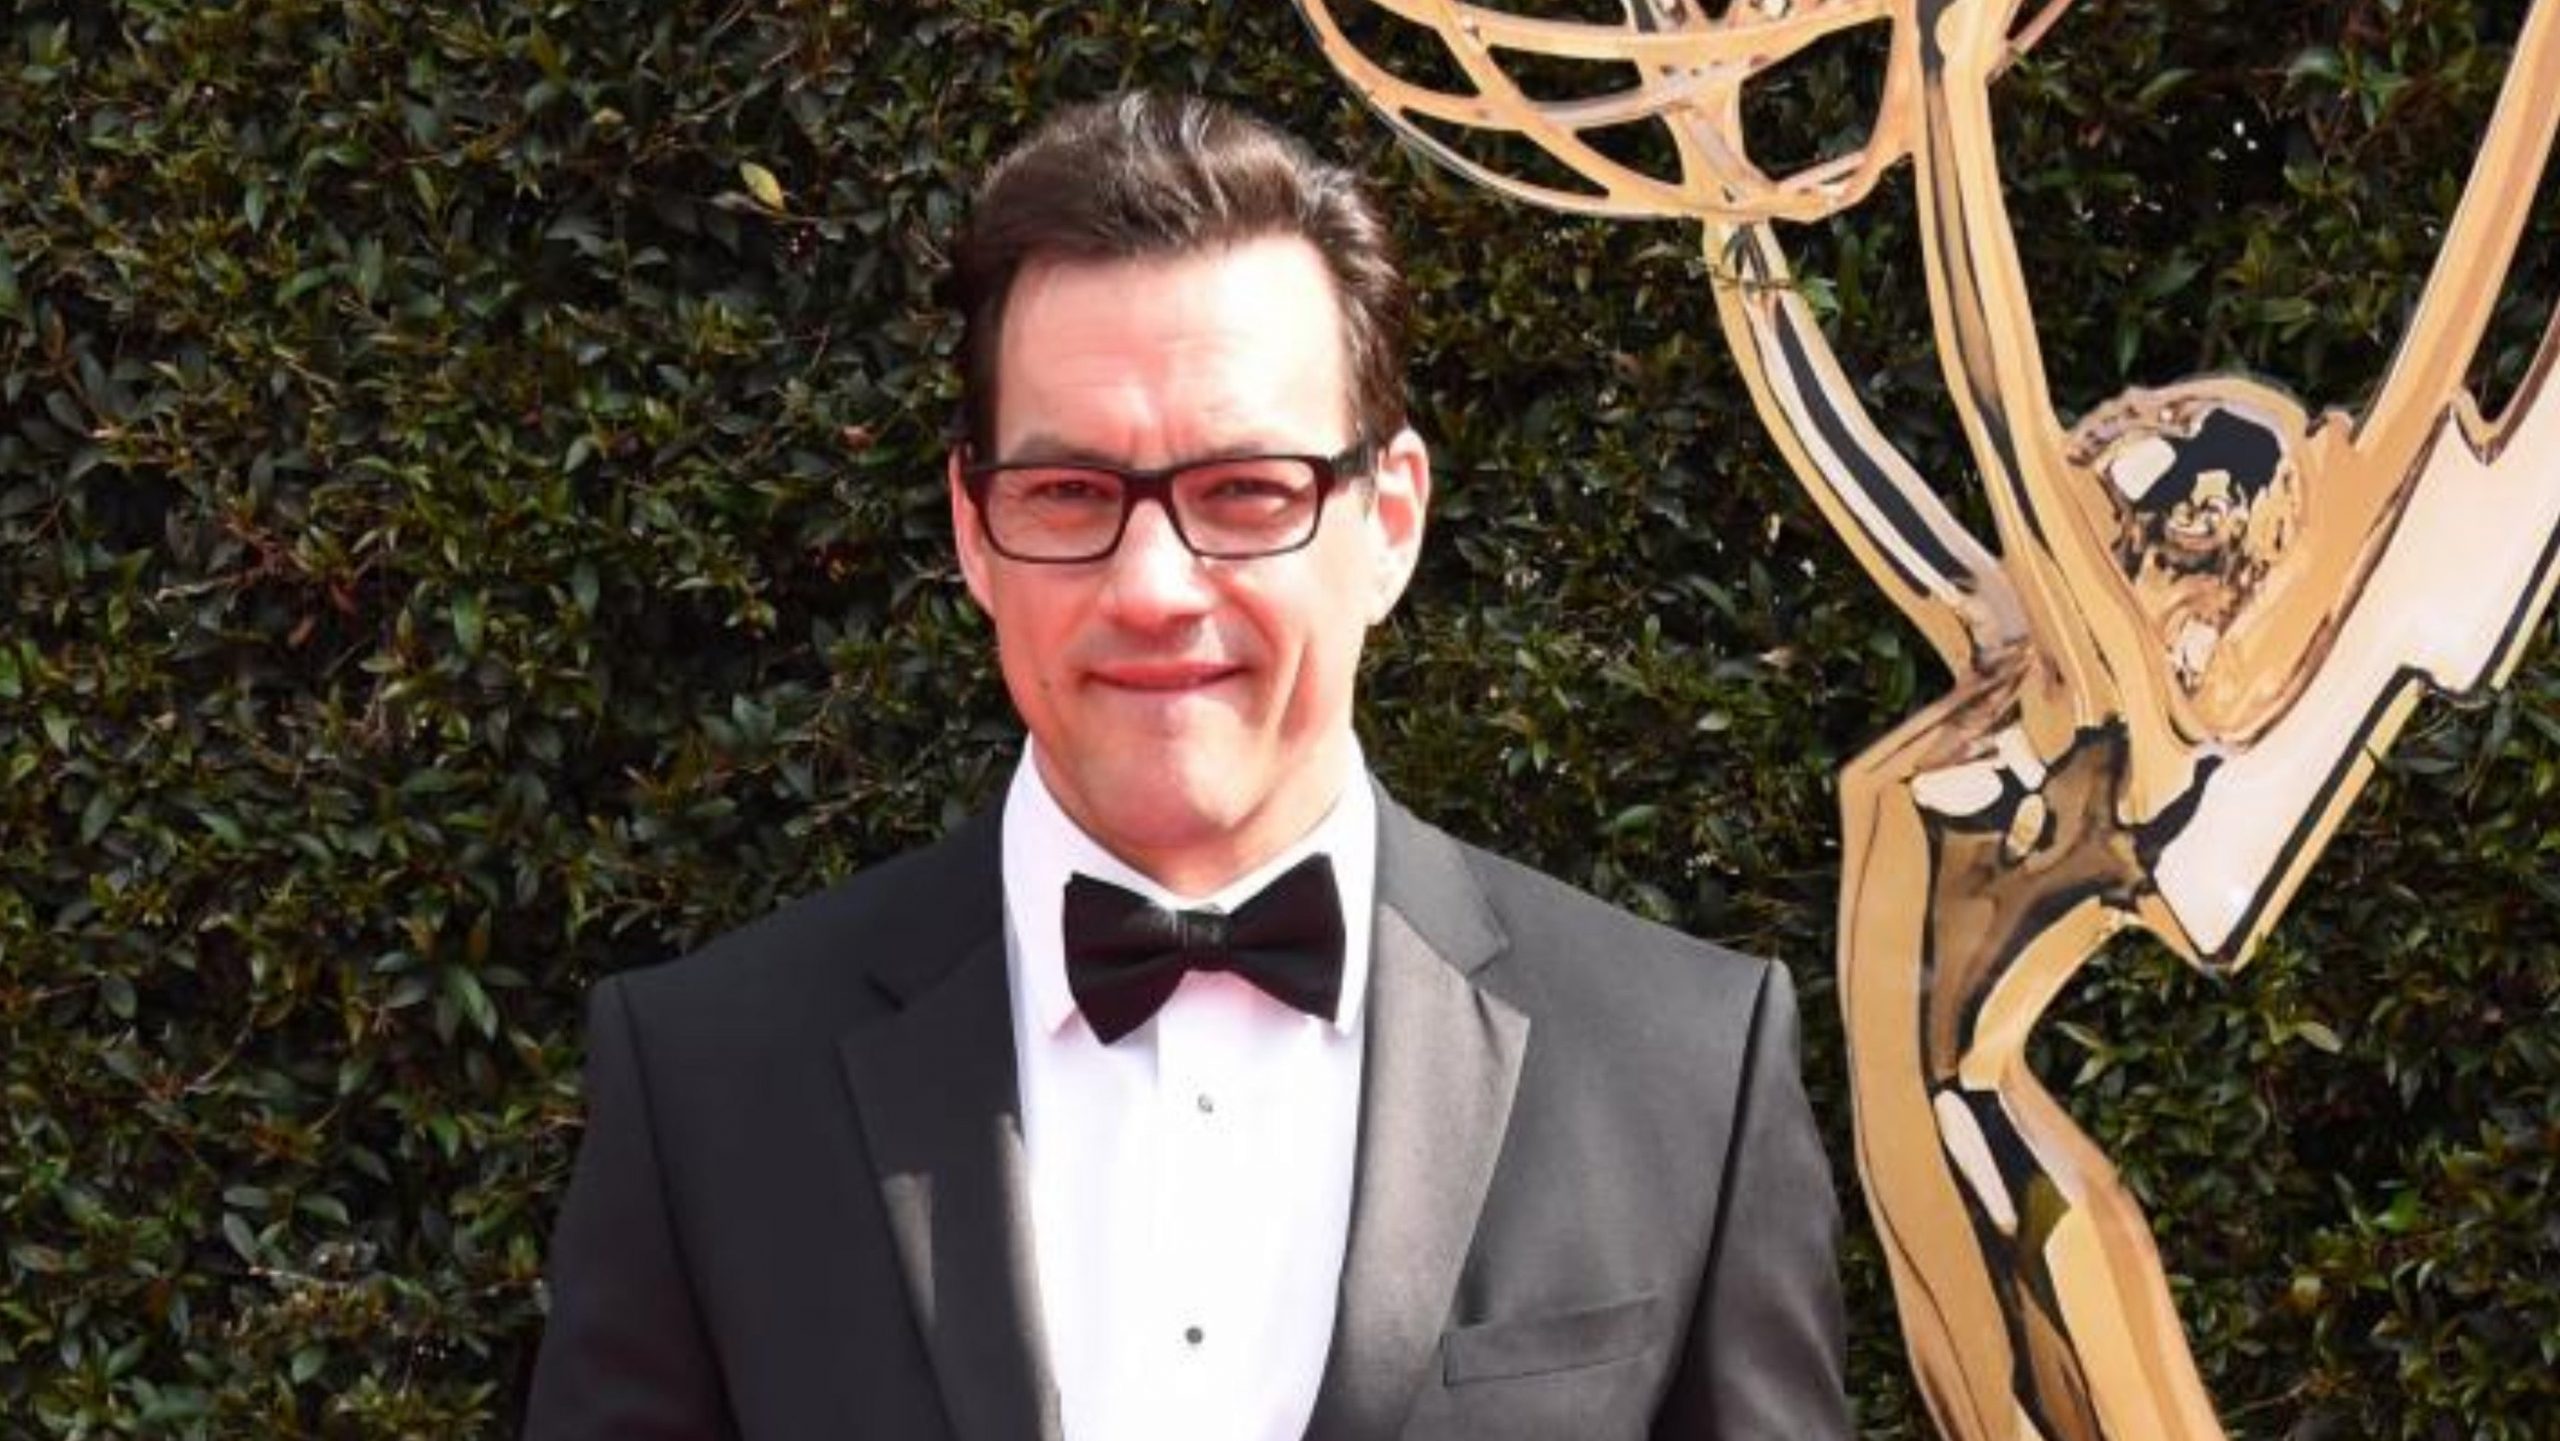 Tyler Christopher, star of &#8220;General Hospital&#8221; and &#8220;Days of our Lives&#8221;, has died aged 50, Magnate Daily